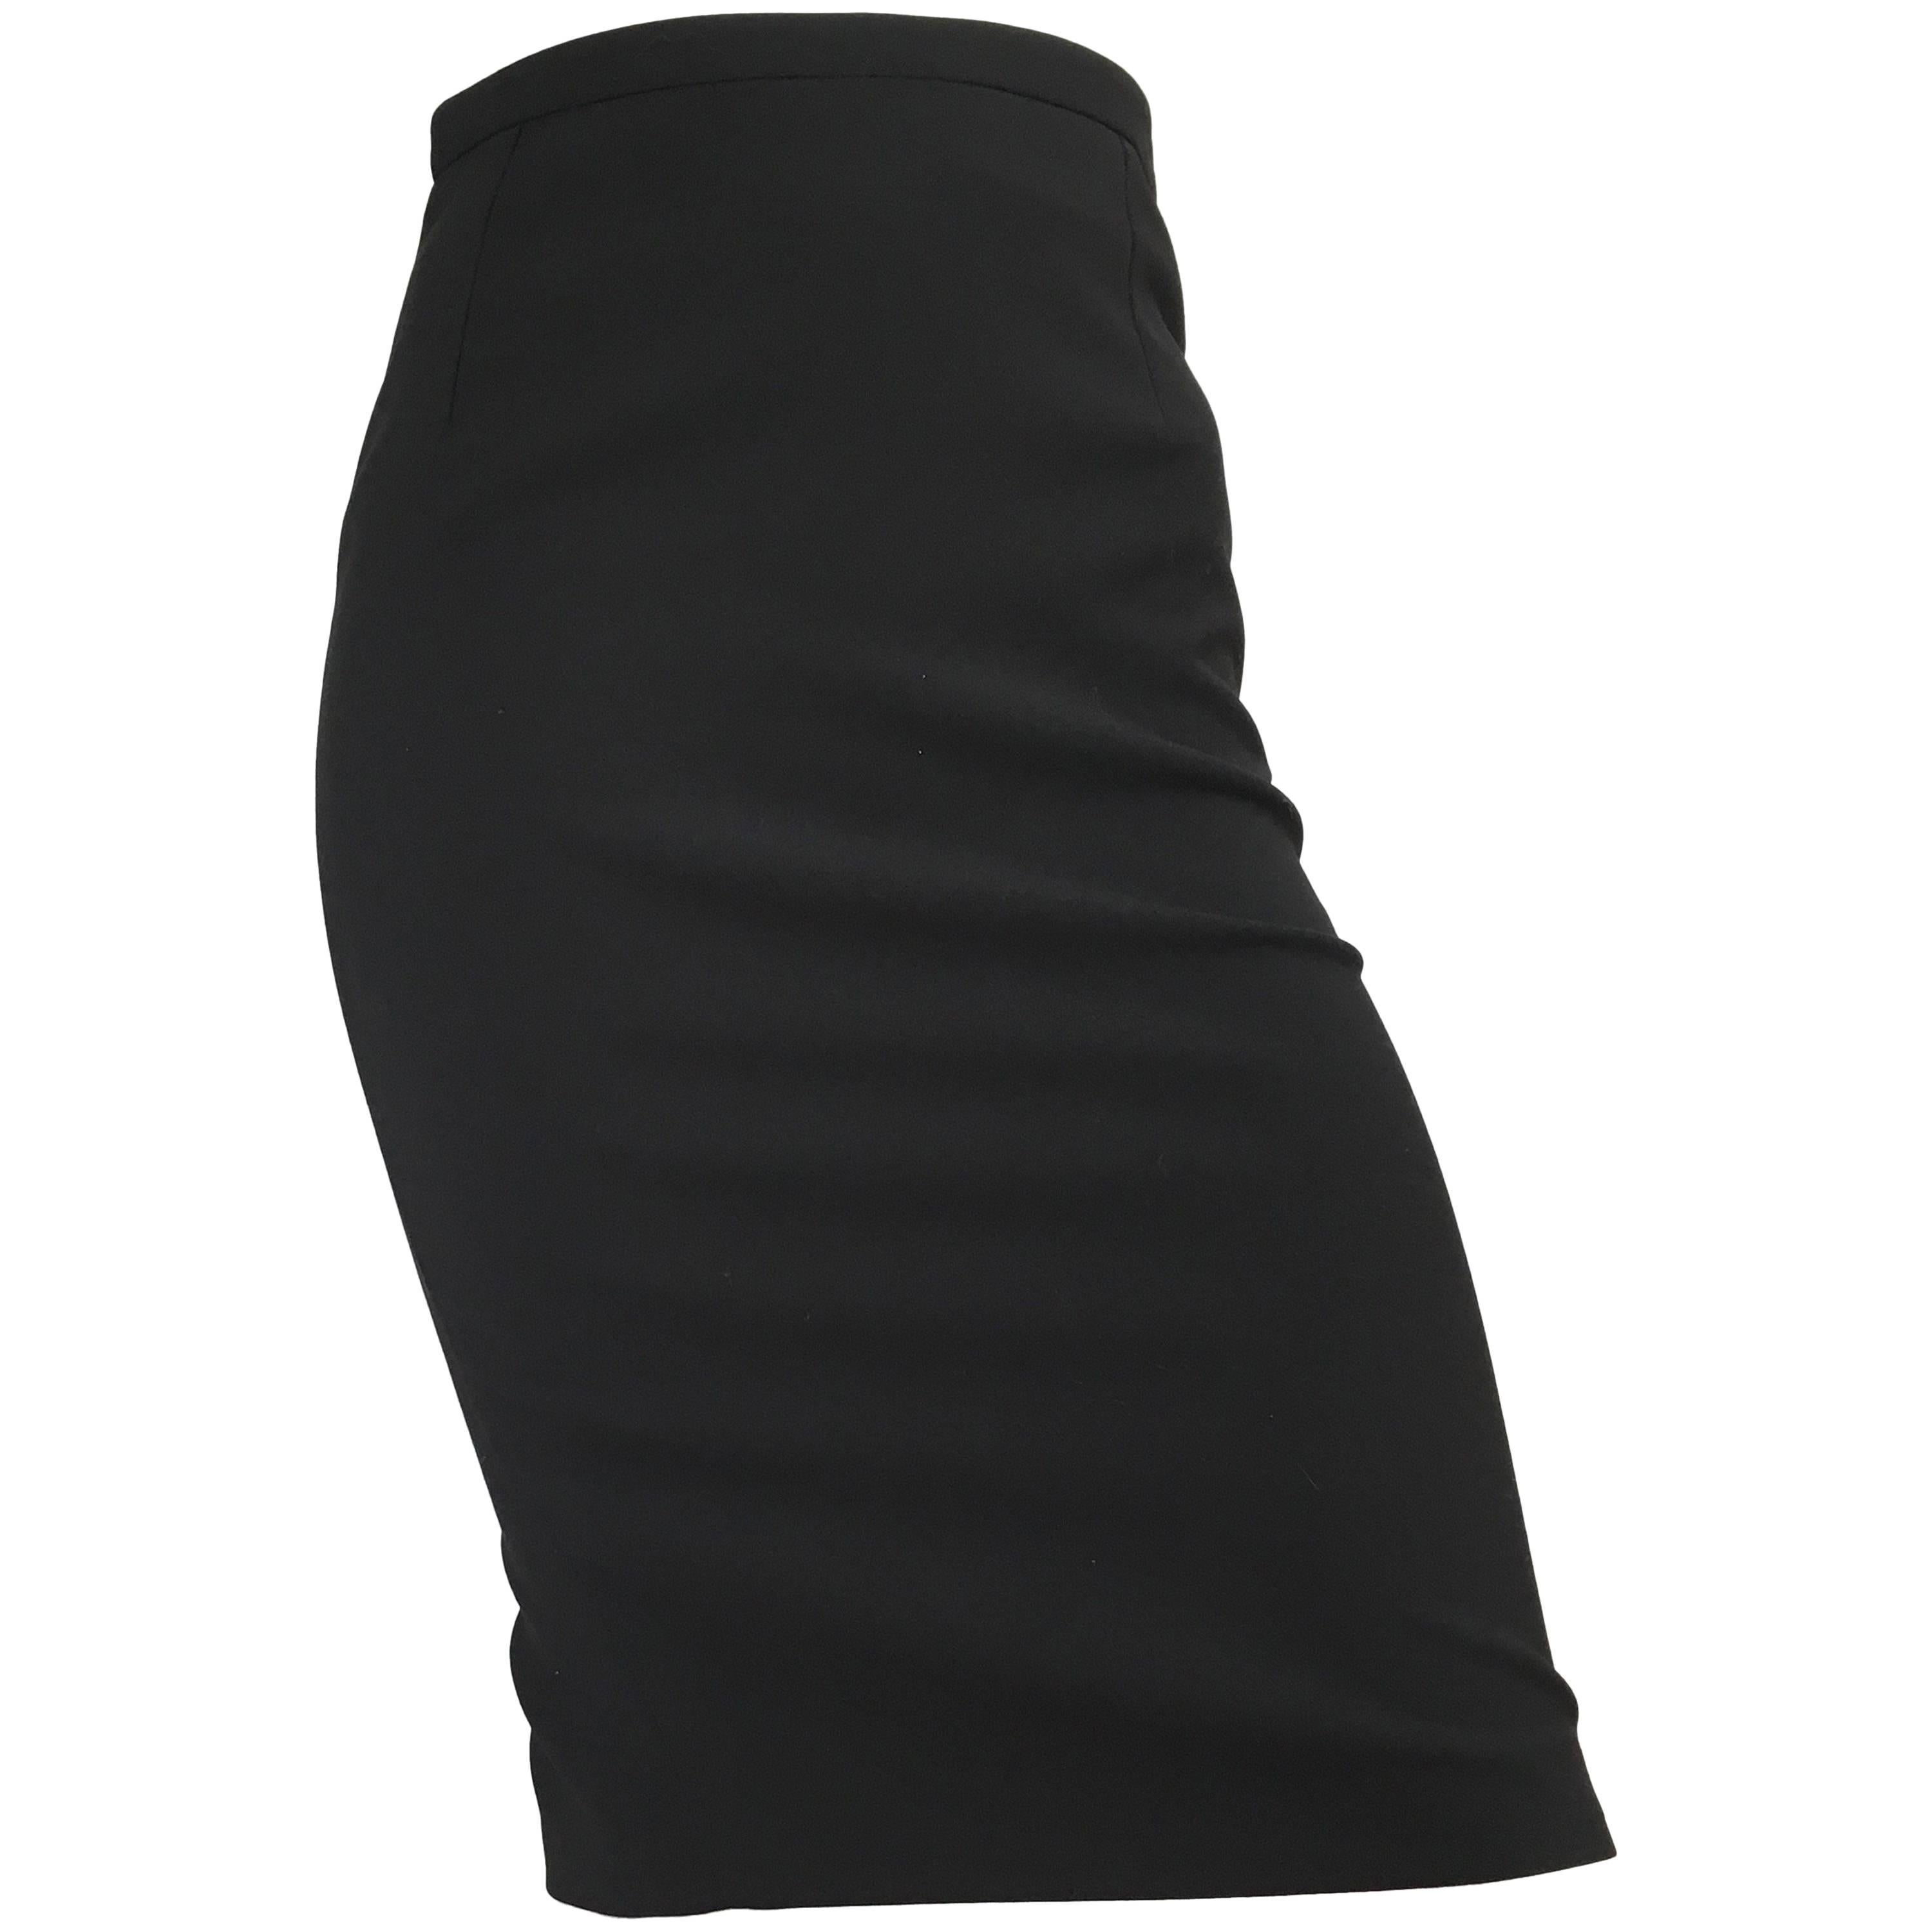 Gucci Black Pencil Skirt Size 4 / 38. For Sale